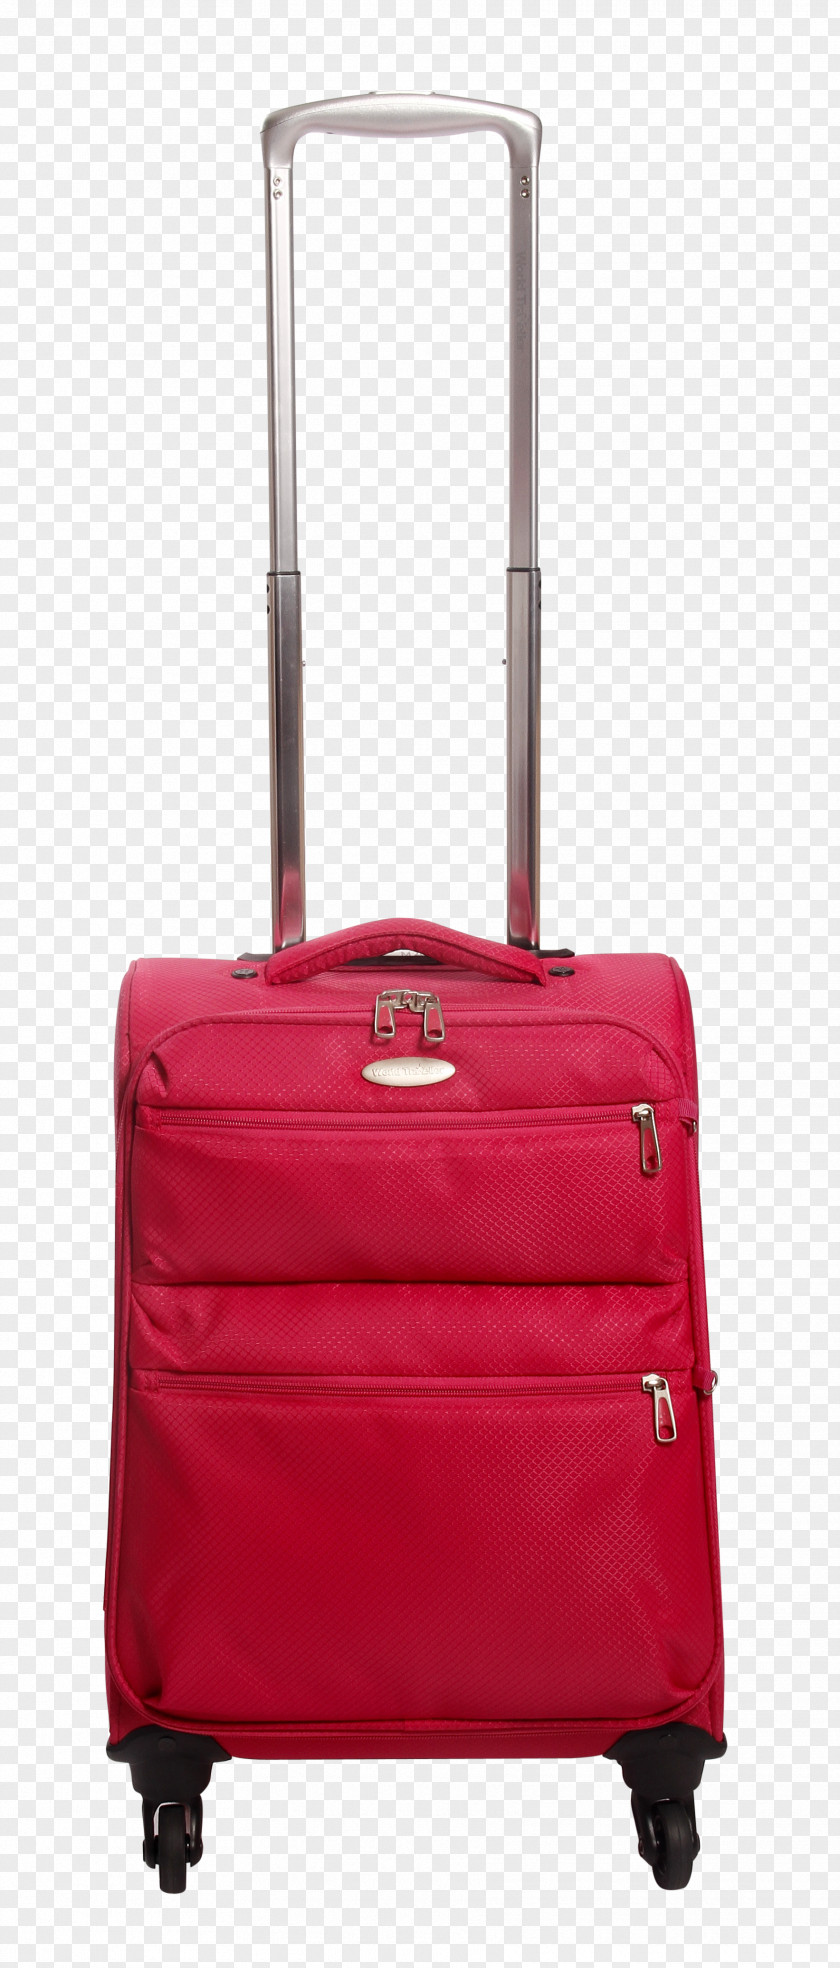 Luggage Baggage Hand Suitcase Trolley PNG